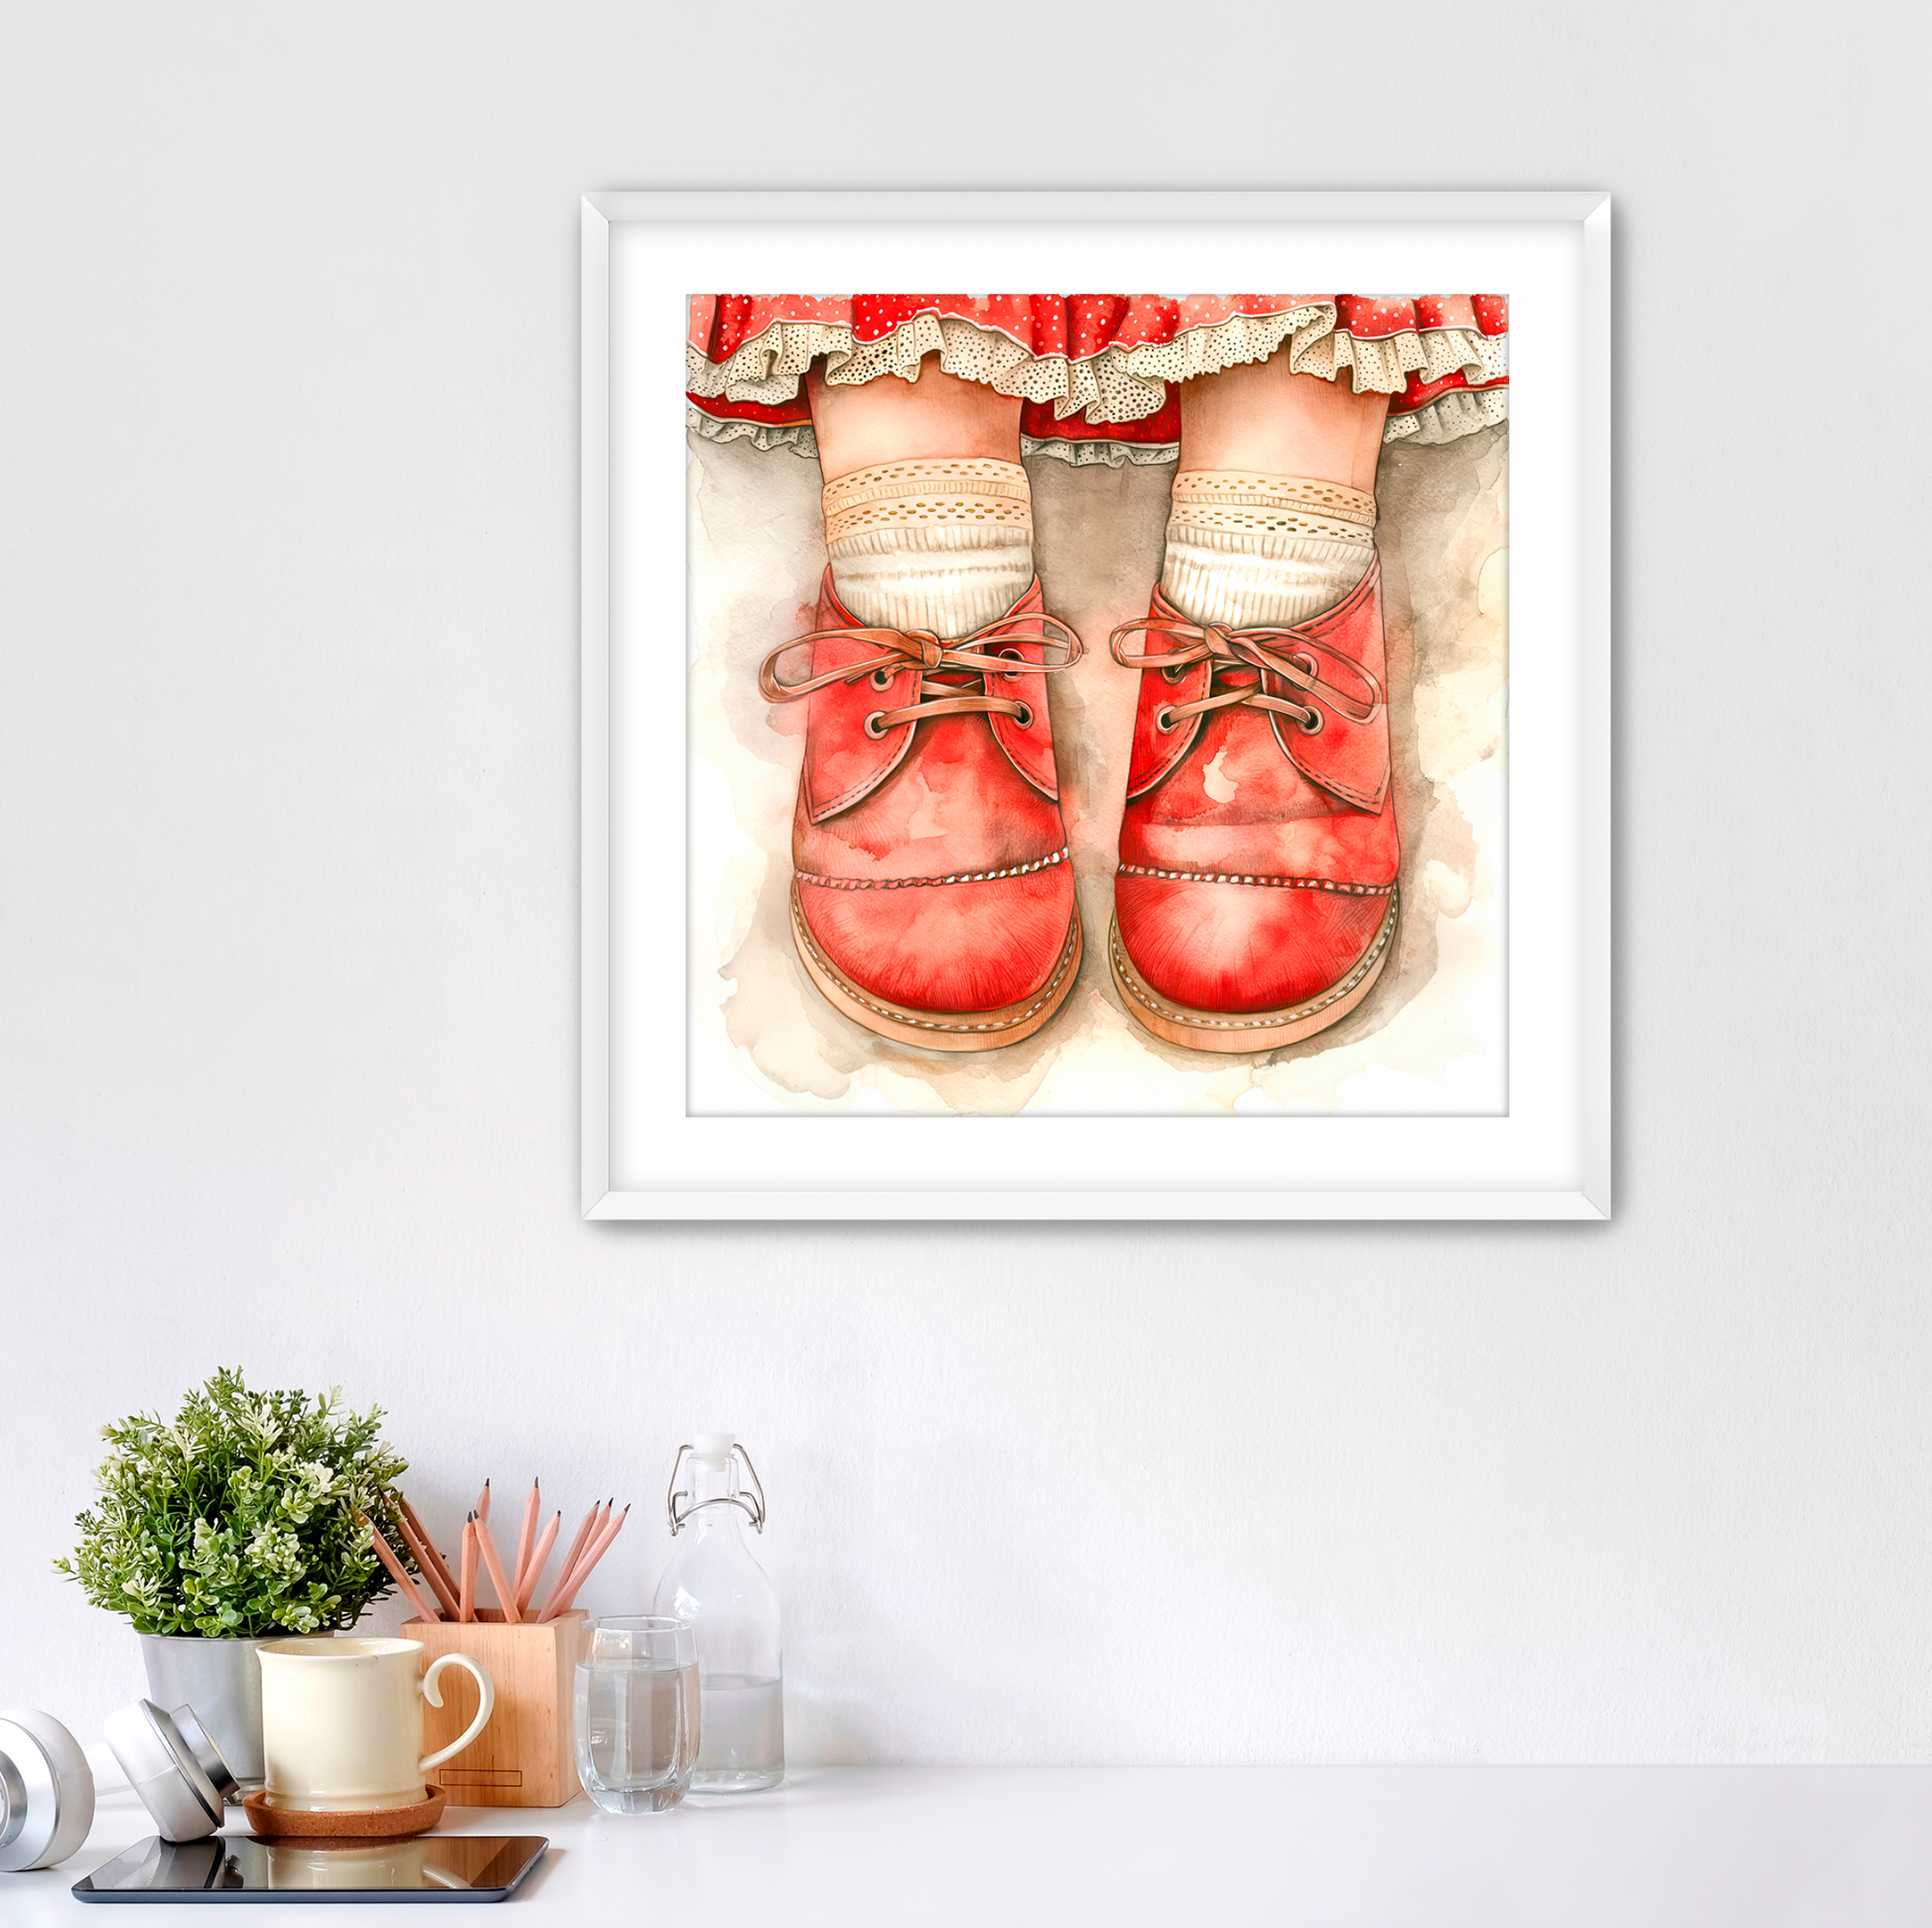 Adorable wall art for kids. Watercolor vintage ensemble showing little girls red shoes closeup with eyelet lace socks and red skirt with tiny white polka dots and lace trim hem. Framed in solid white with white mat. Art for sale at customconcepts.art